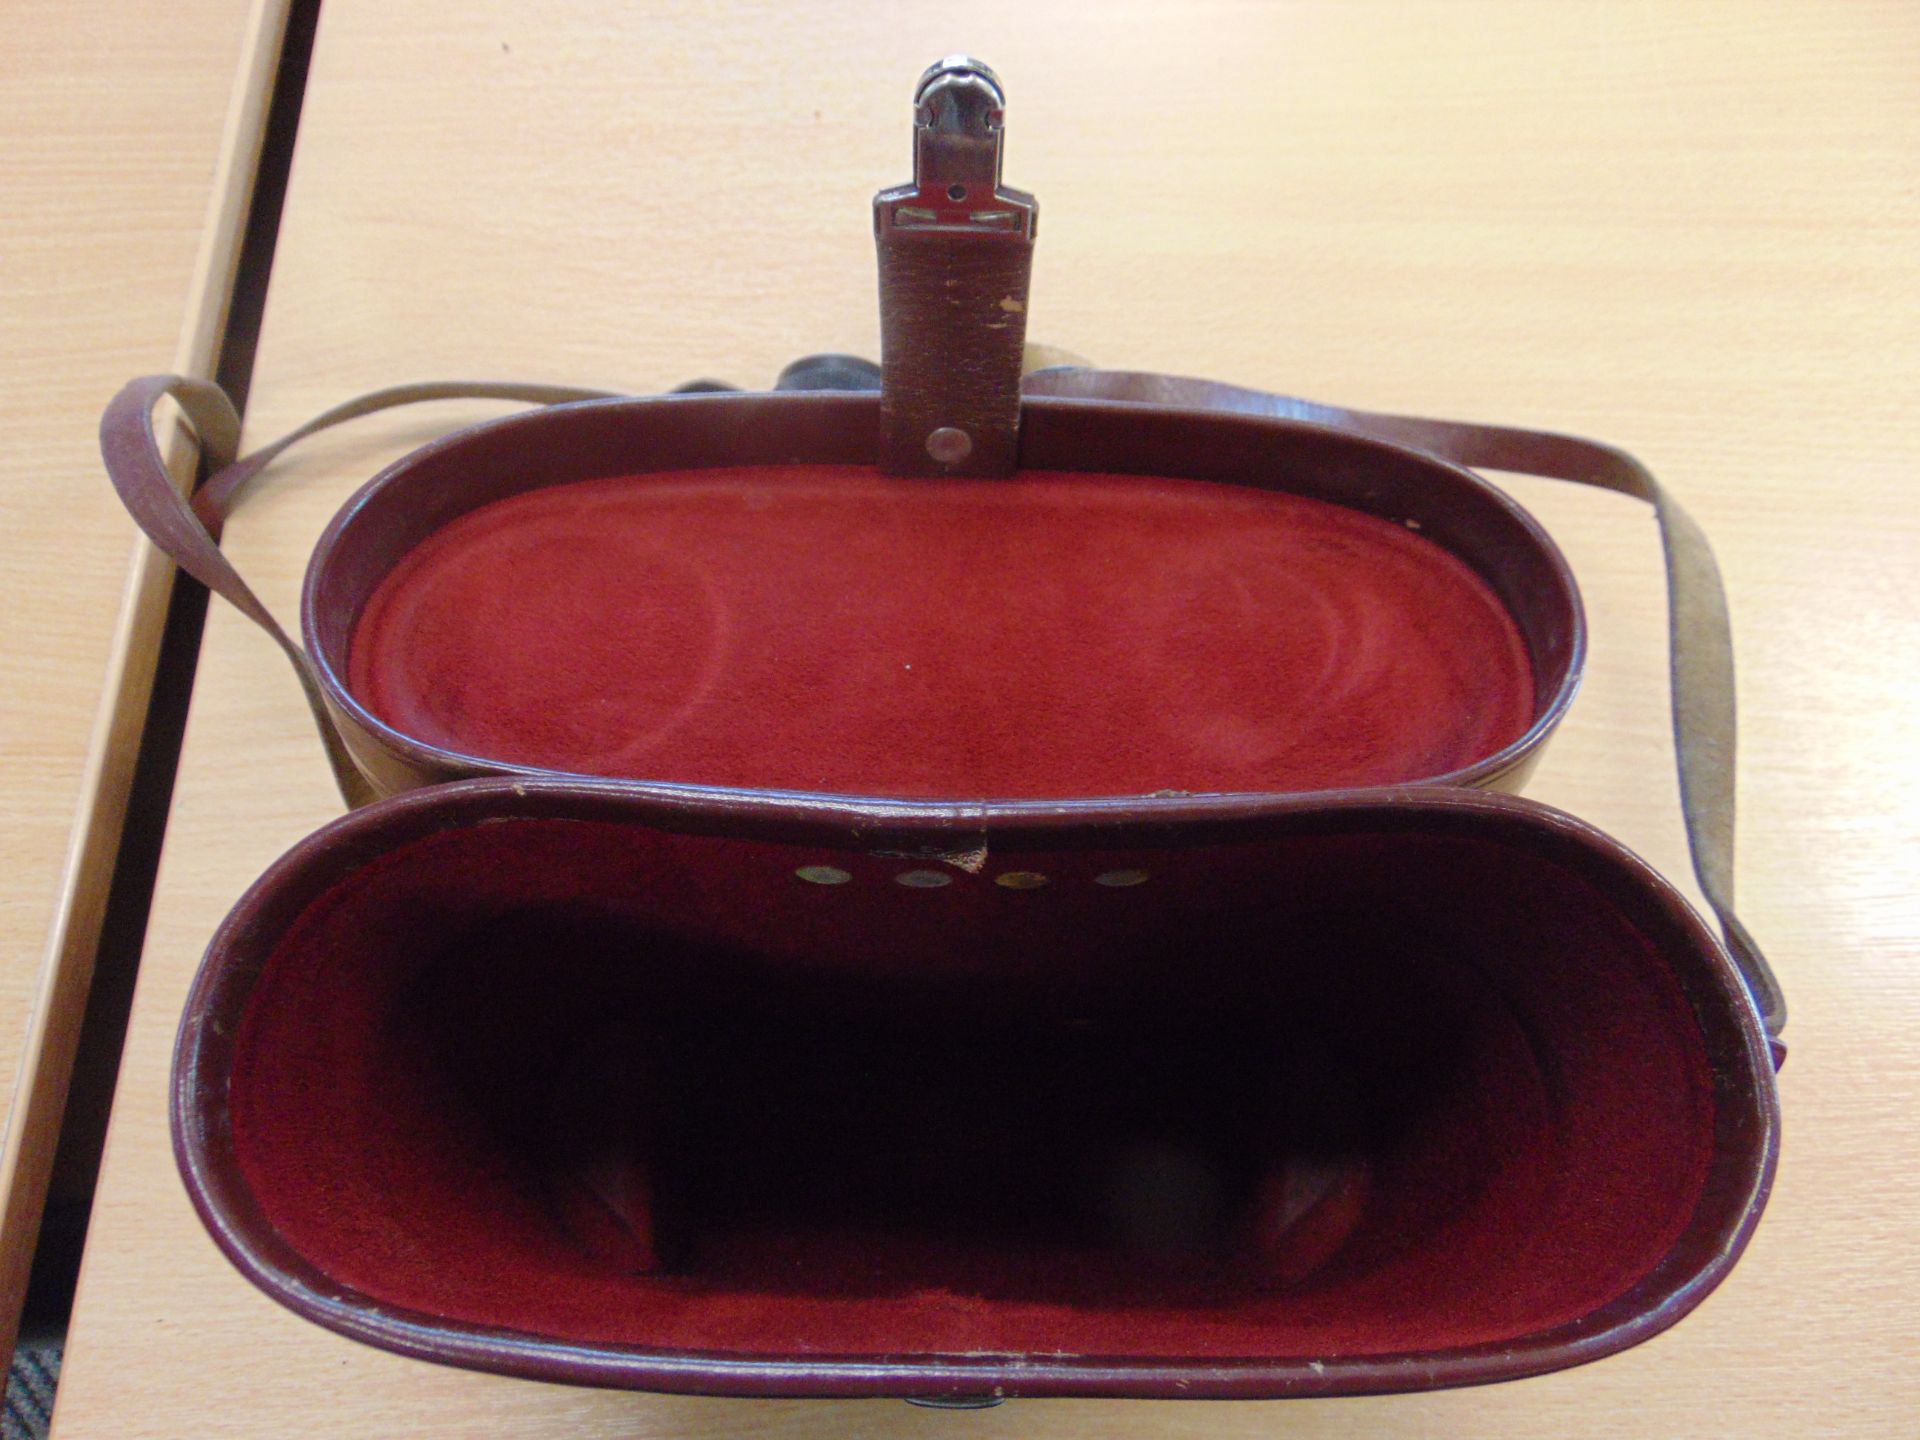 Very Nice Pair of Carl Zeiss Jena 10x 50 w Multi Coated Binos in Original Leather Case - Image 7 of 8